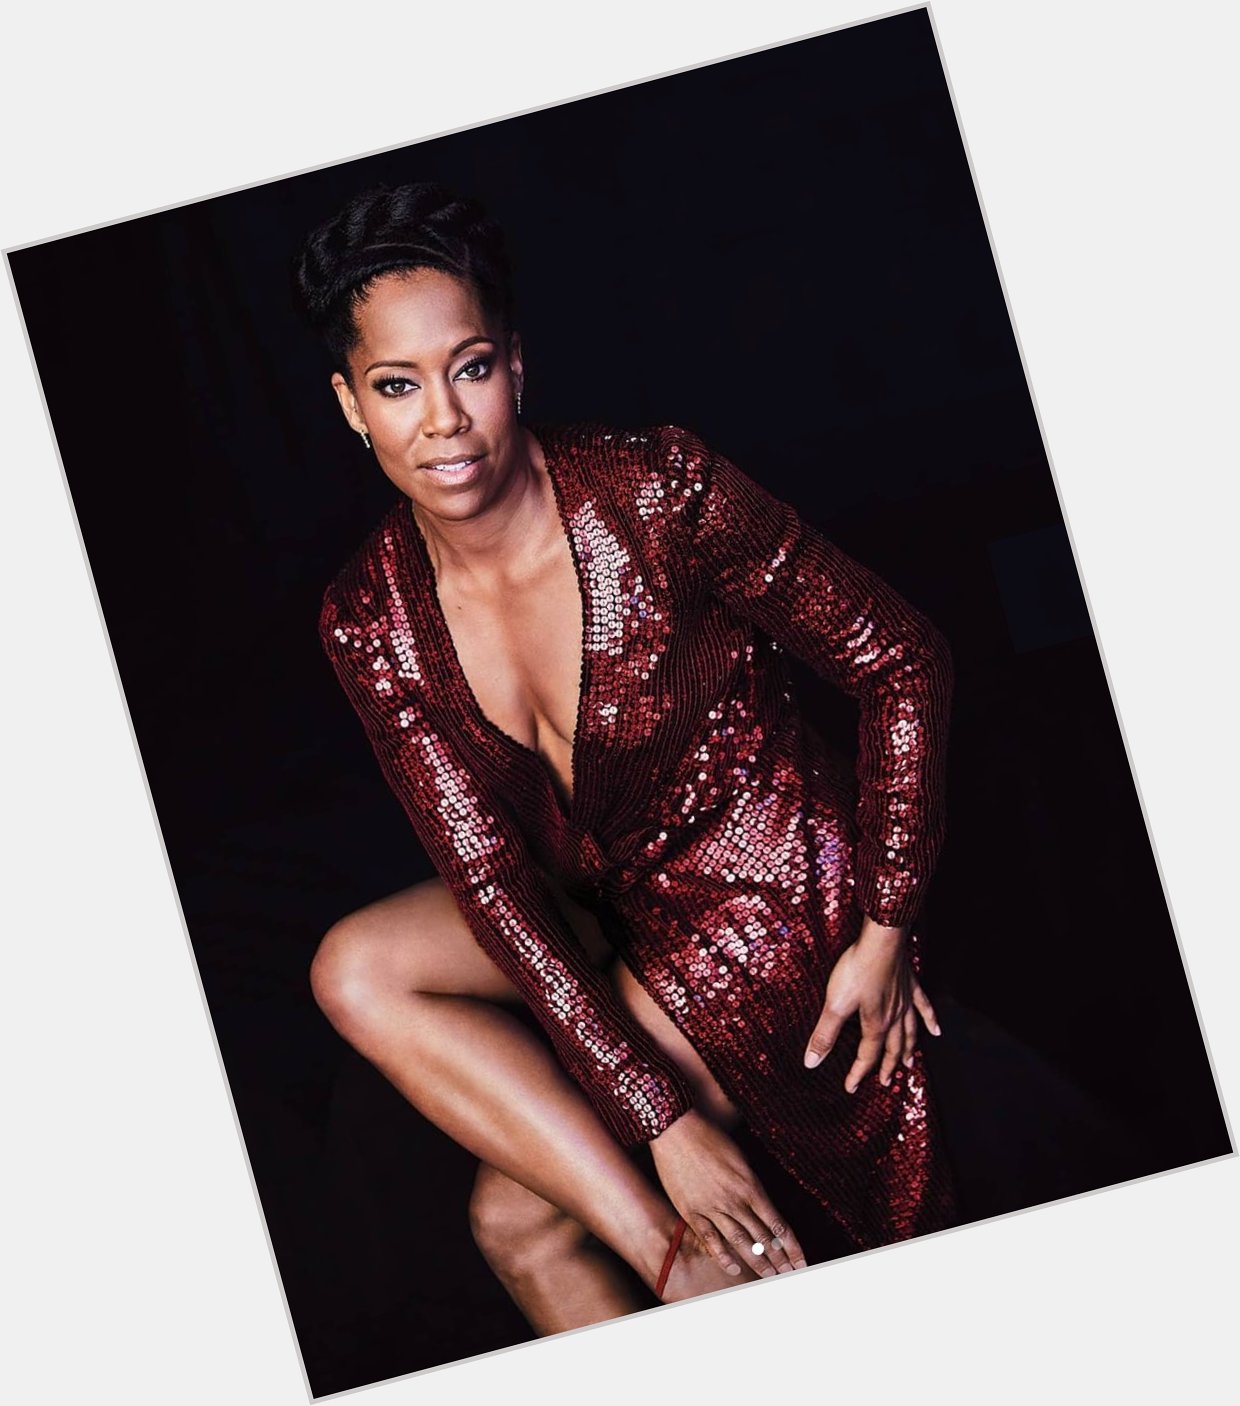 \"I think women supporting women is priceless.\" Regina King, who turns 48 today. Happy Birthday, 